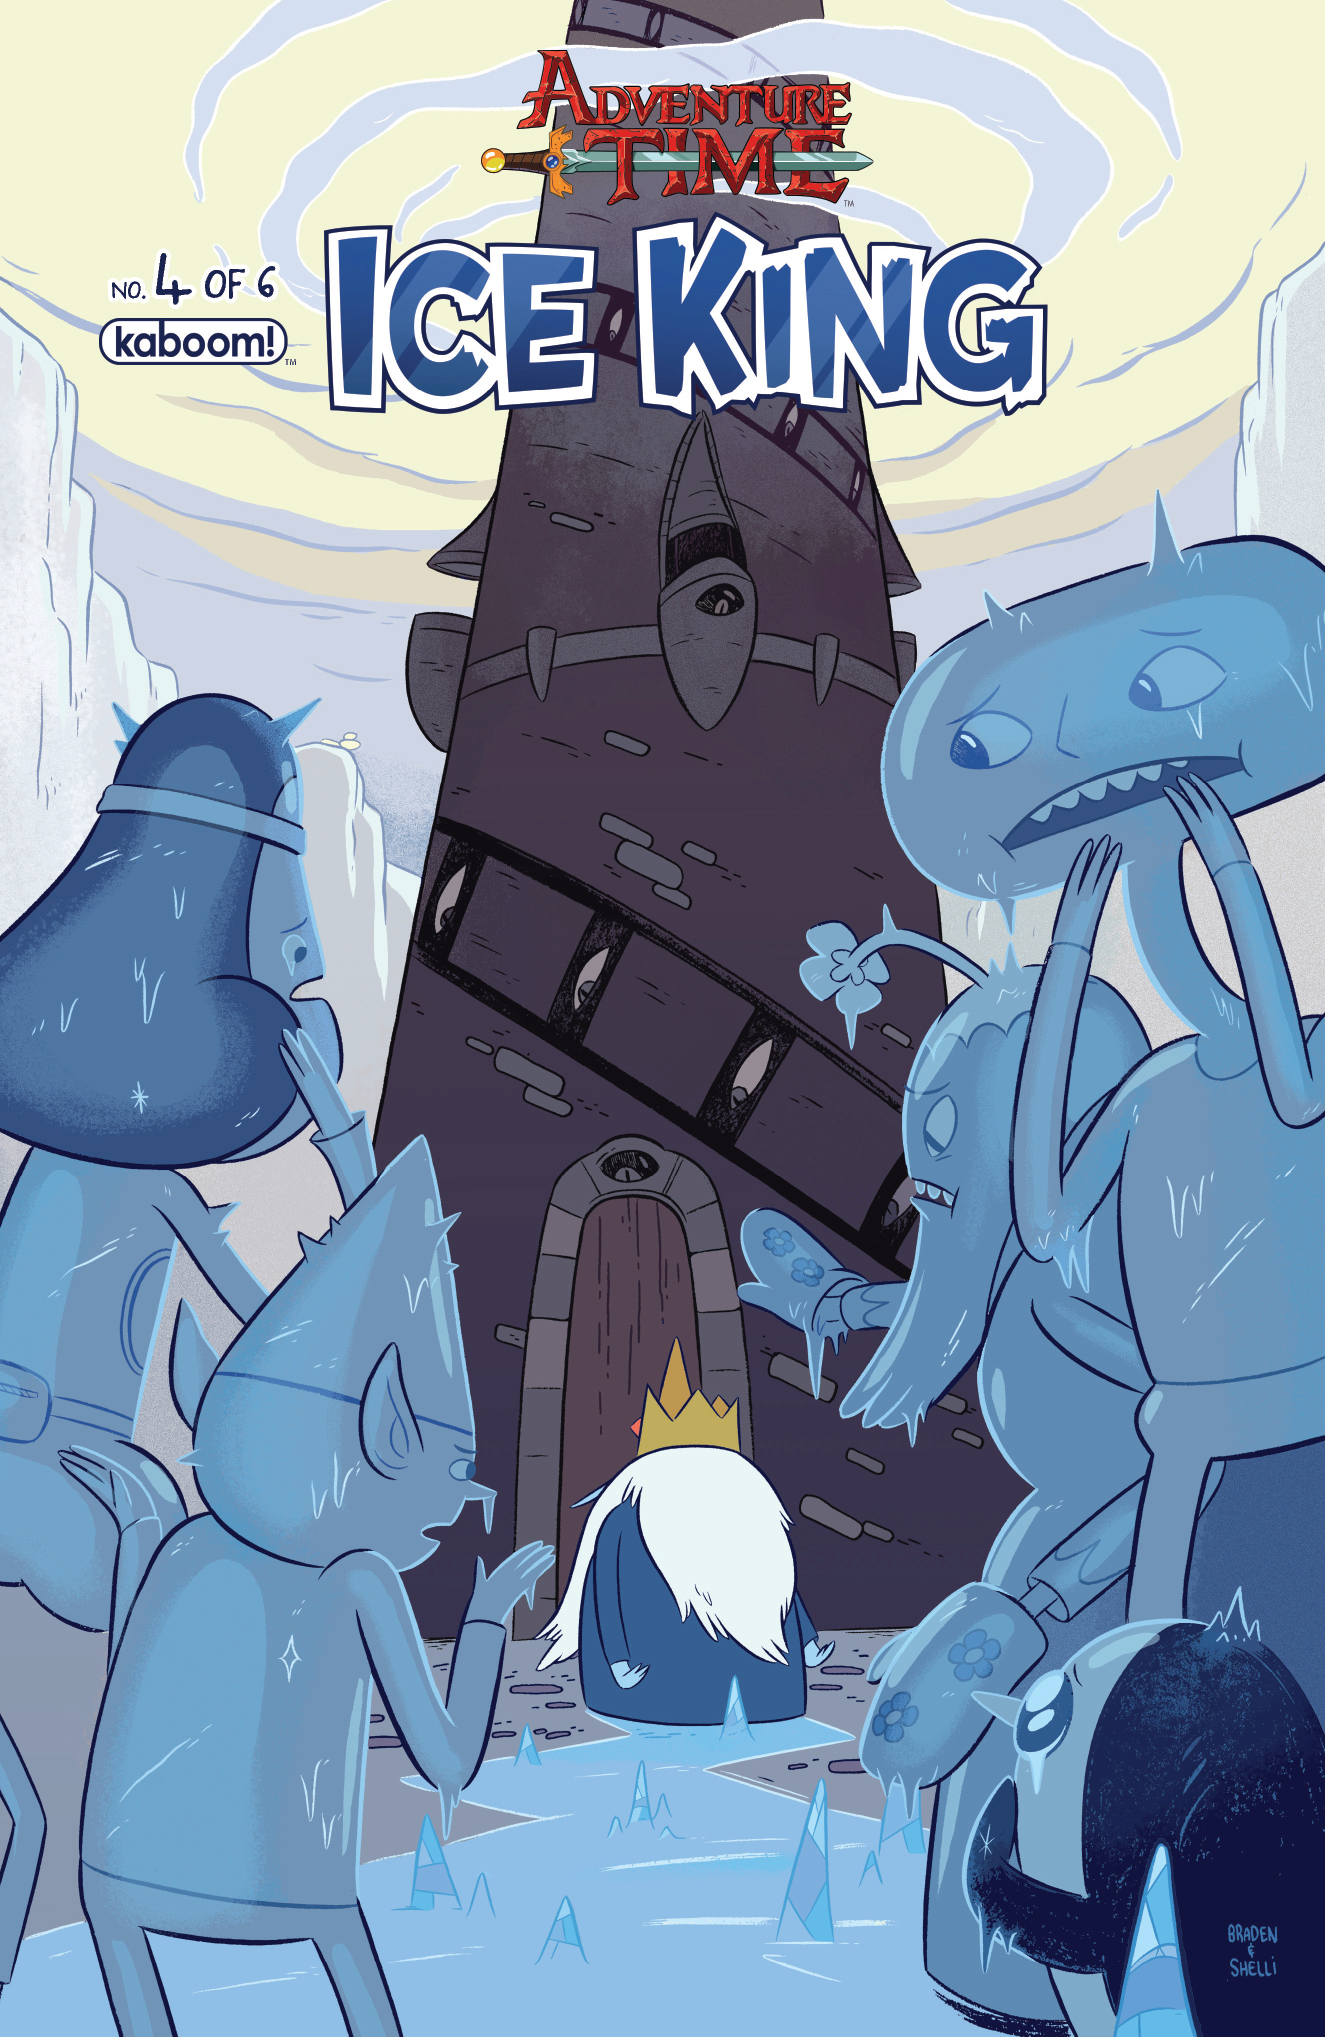 ADVENTURE TIME ICE KING #4